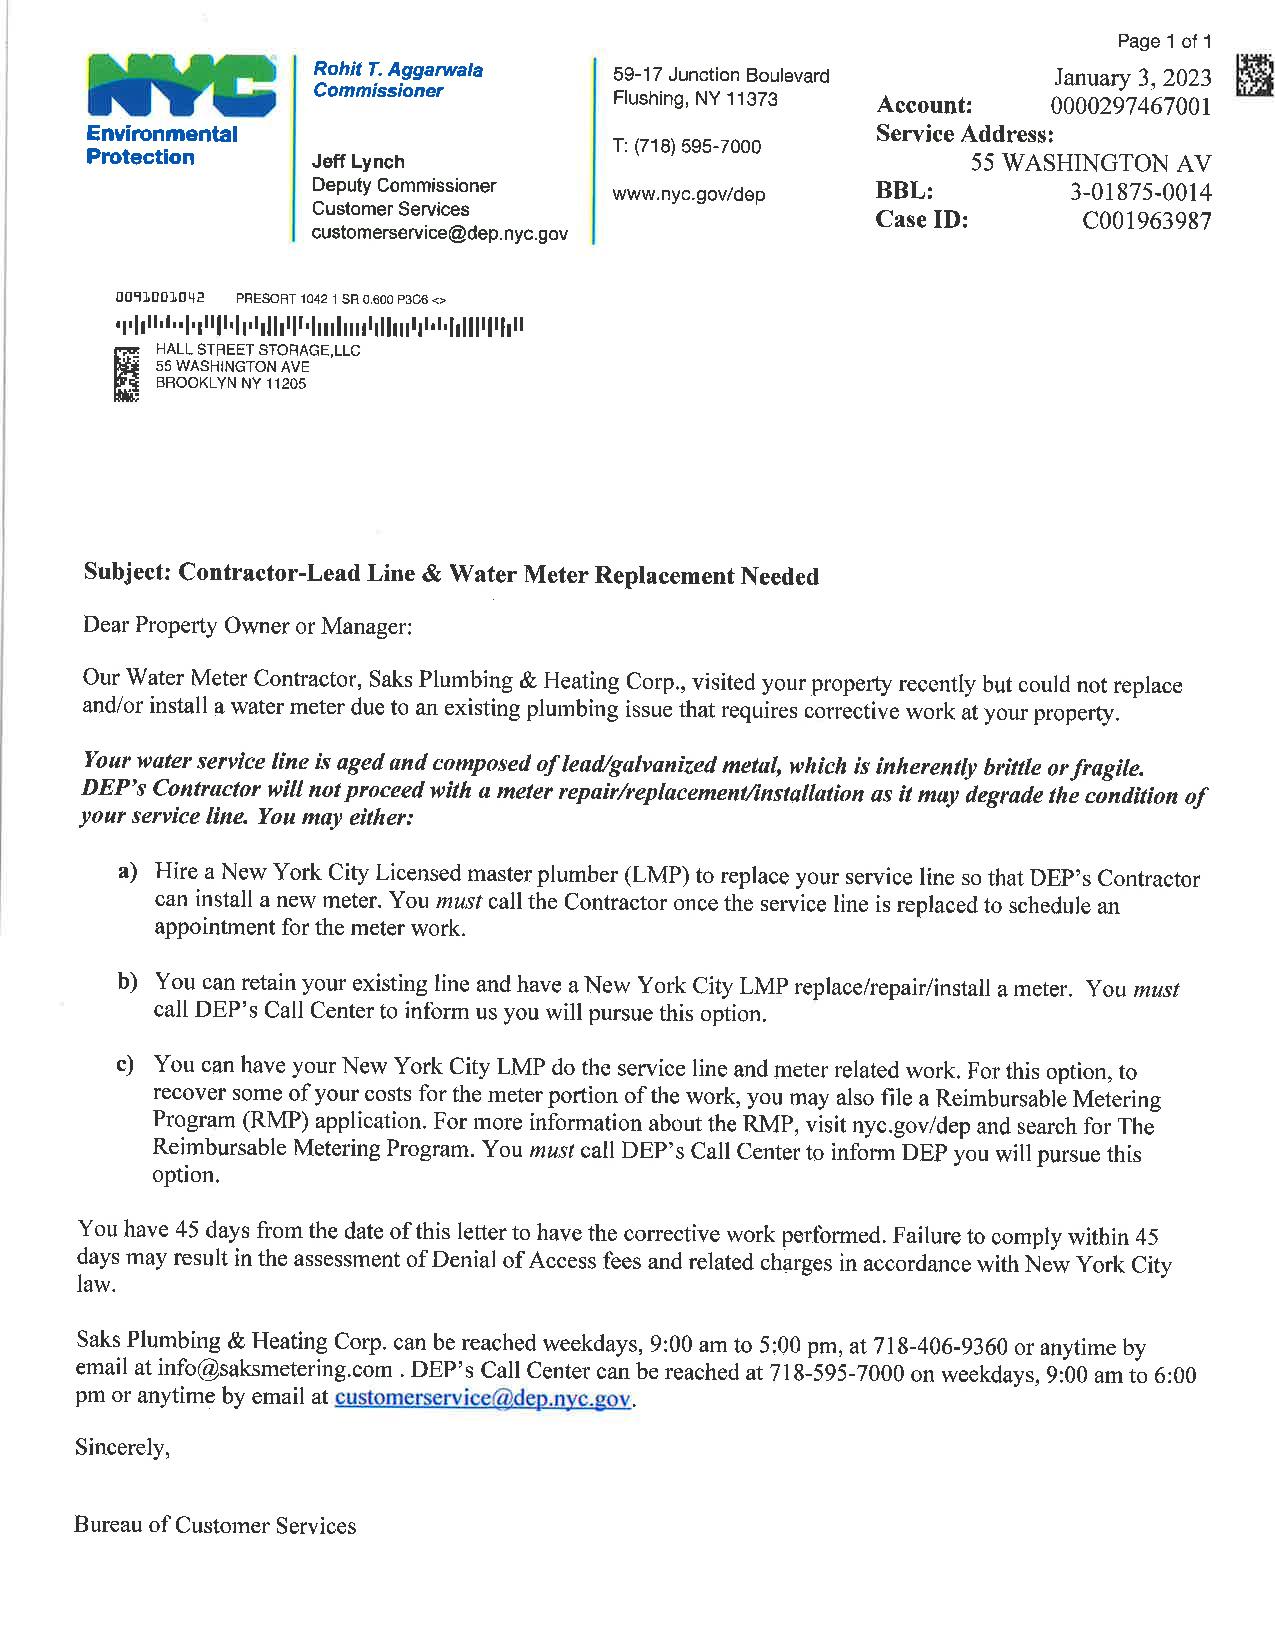 Lead WATER LINE REPLACEMENT Notice